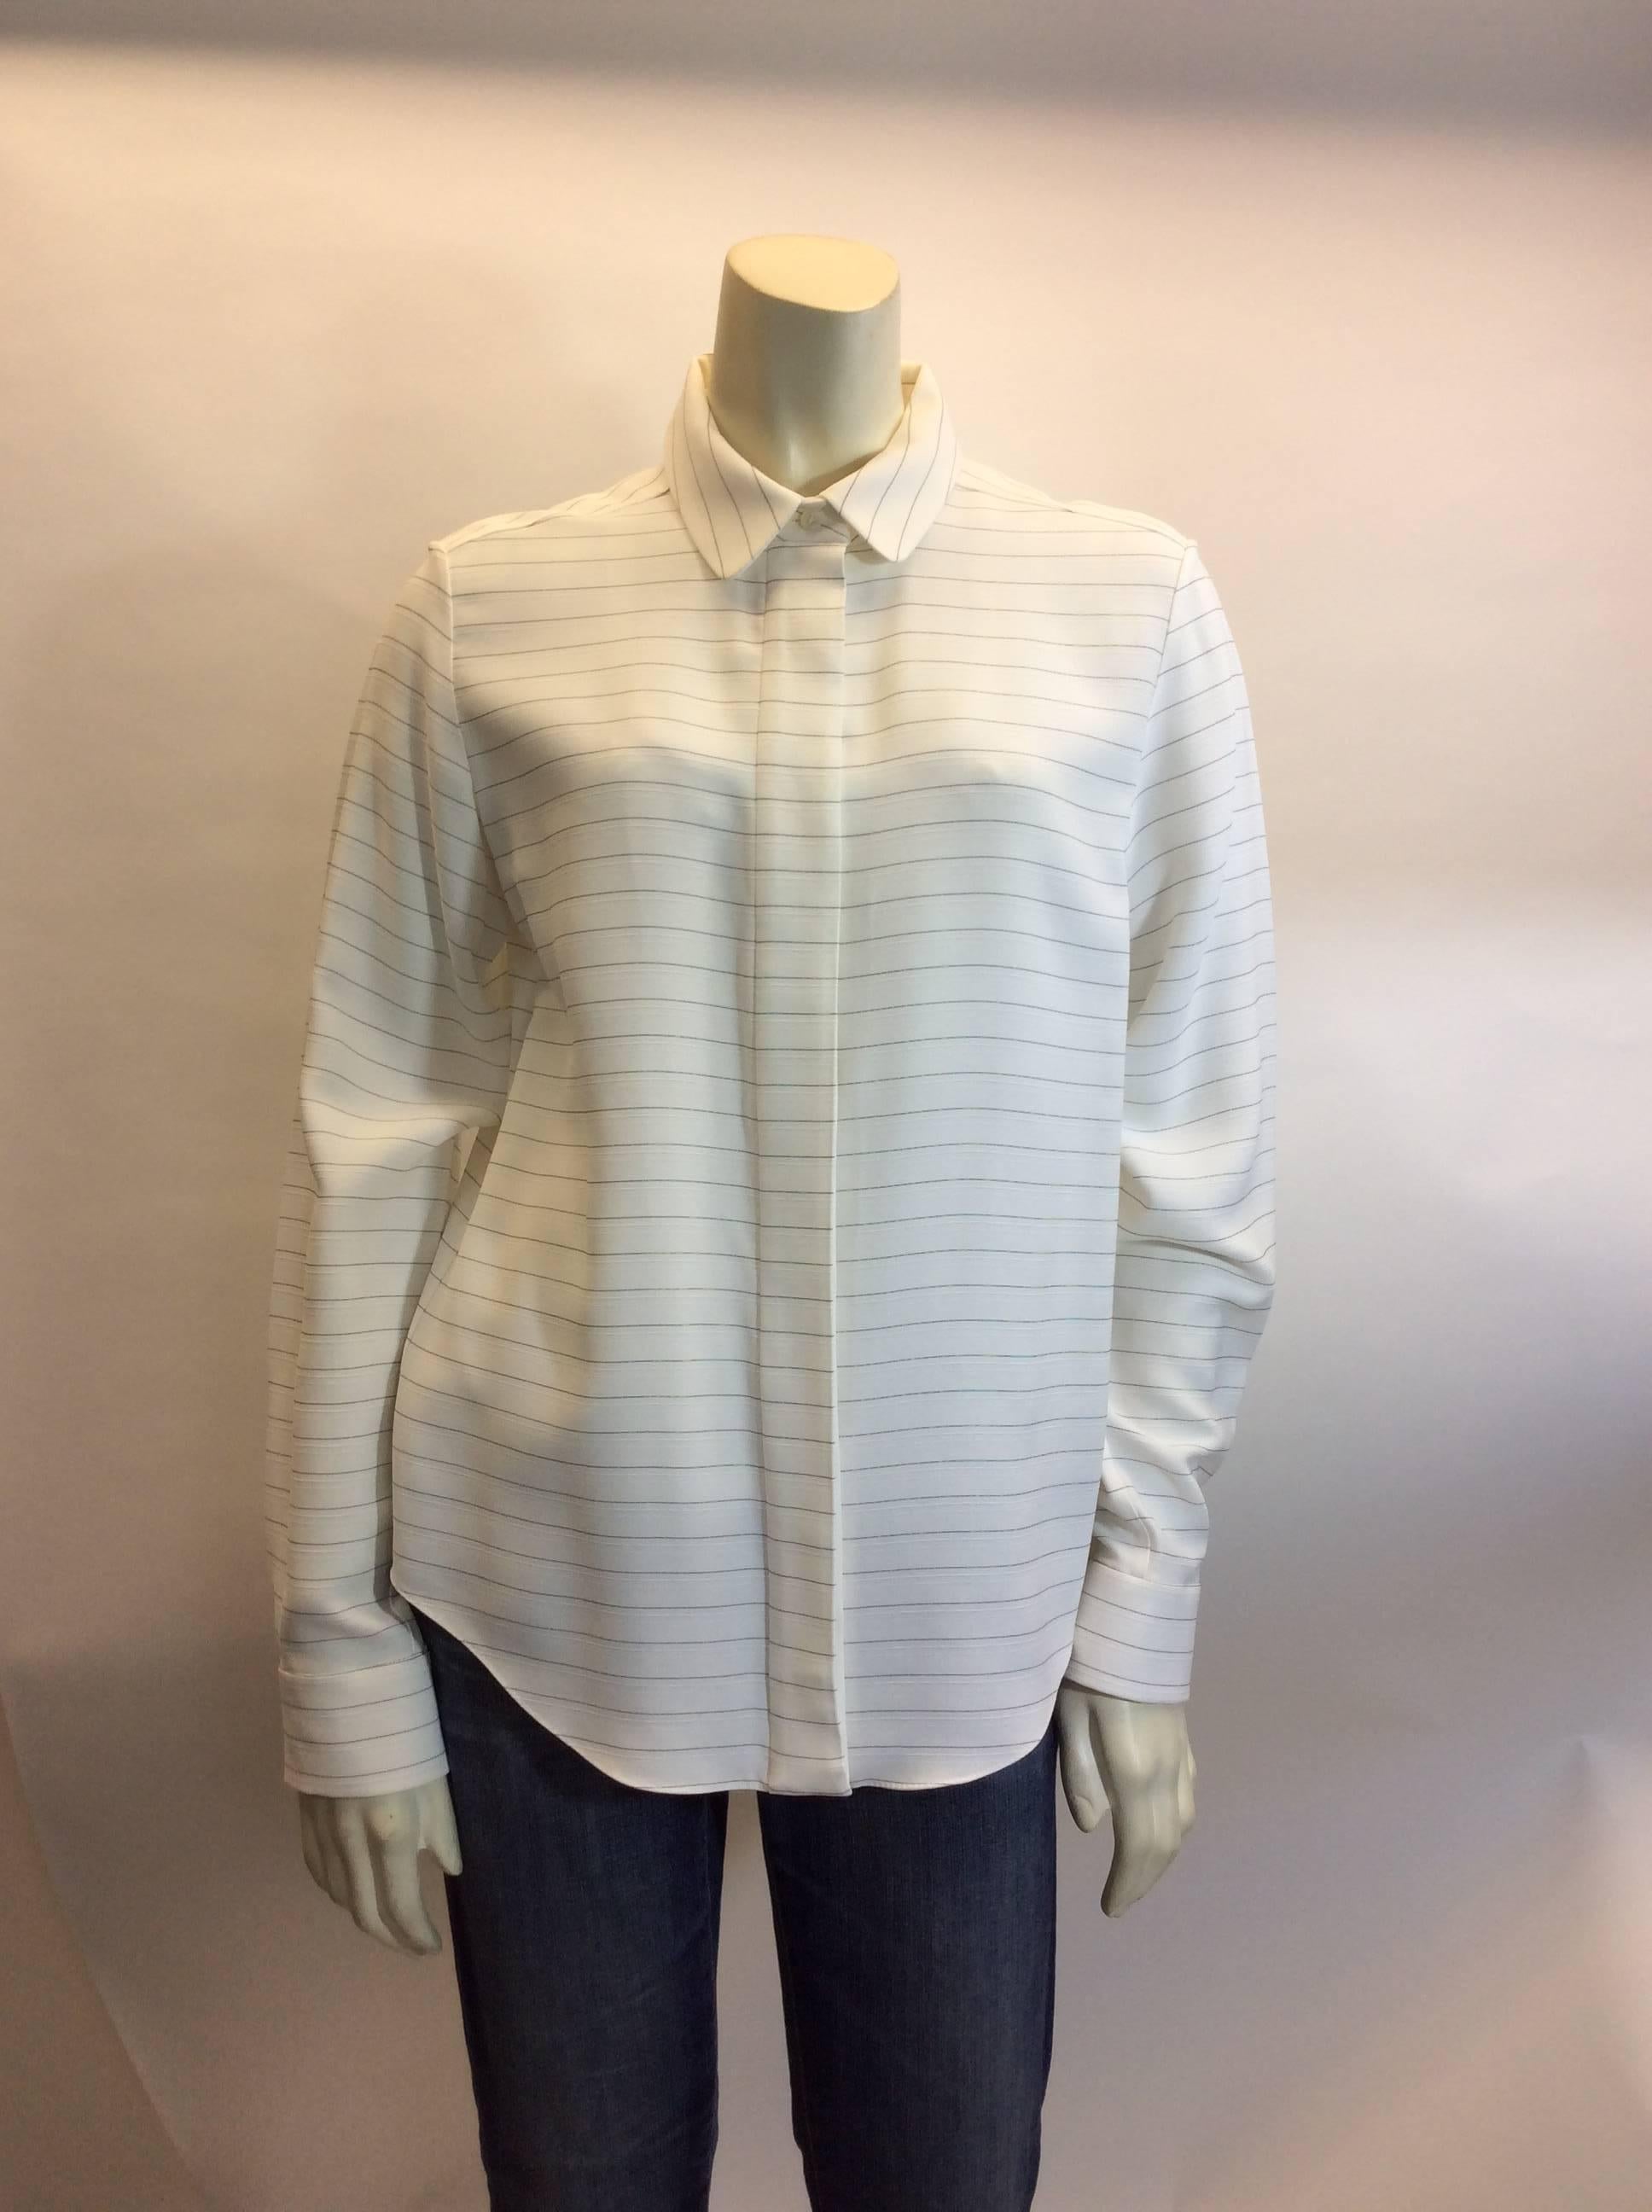 Chloe Buttondown Striped Blouse
Size 39
Cotton & Viscose
Comes with belt
Made in Slovakia
$485